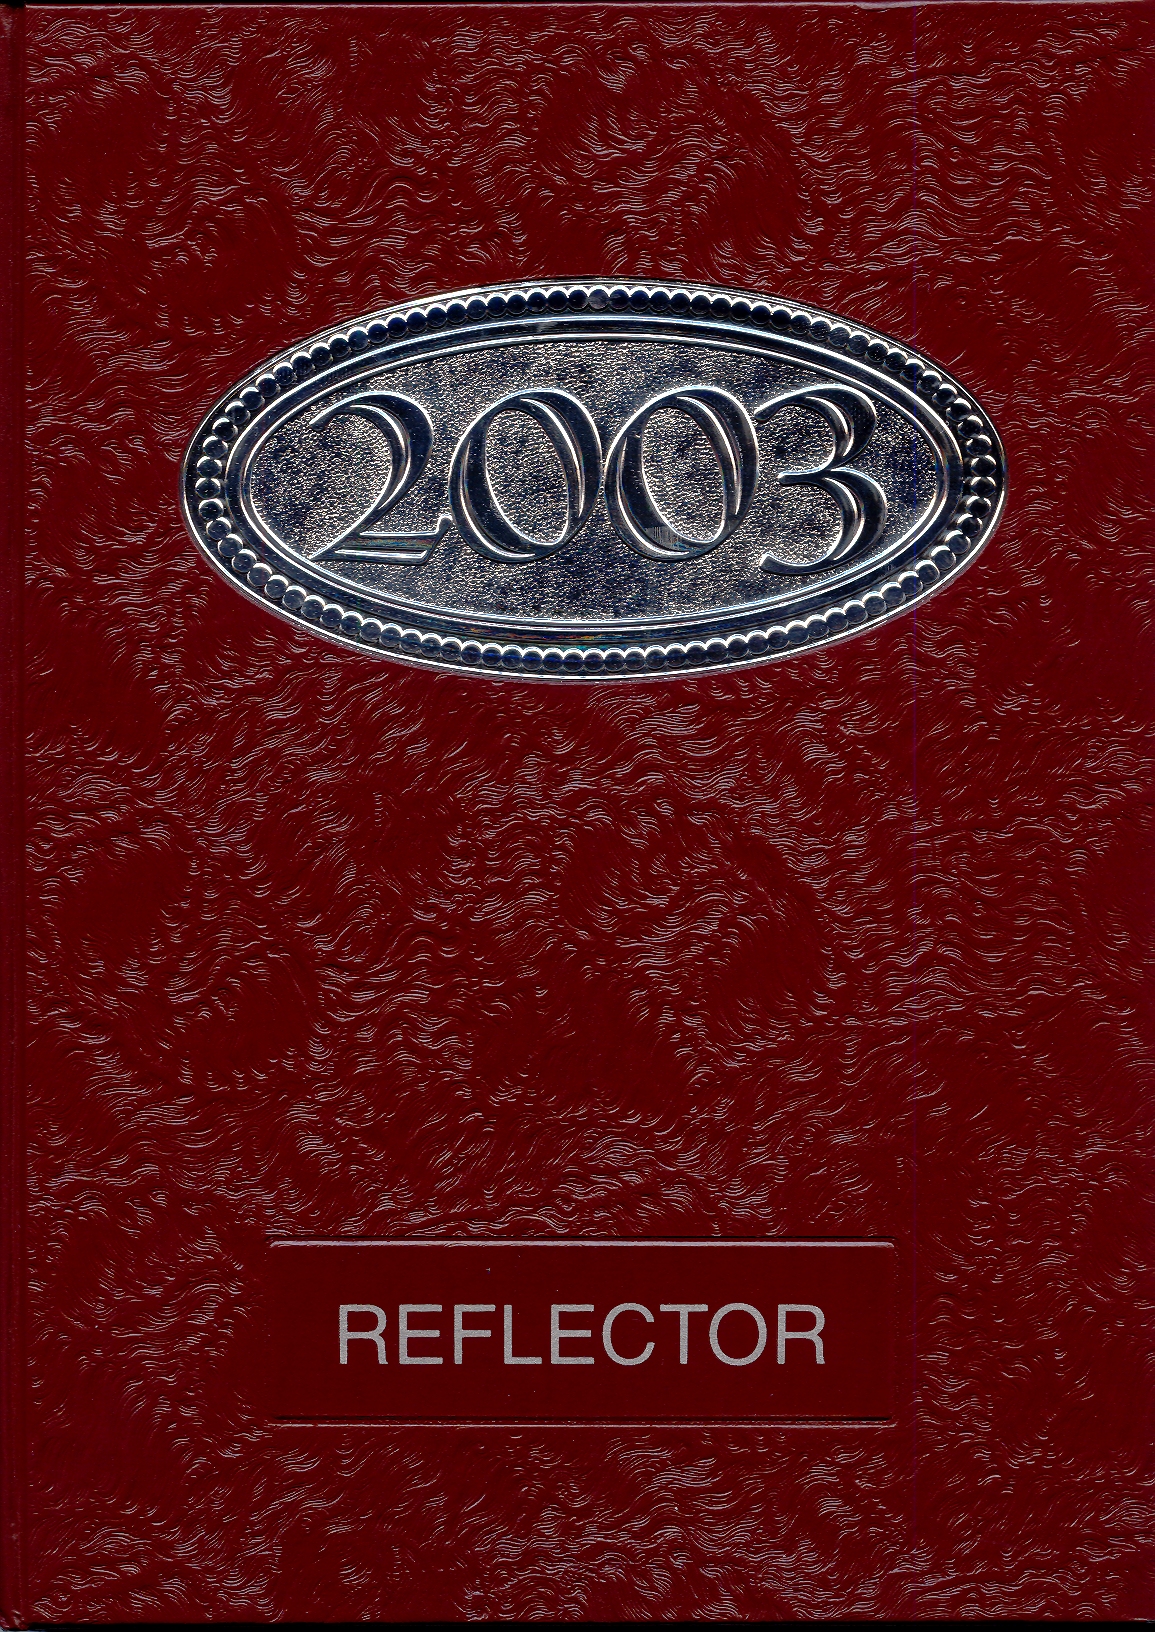 2003 Reflector Cover